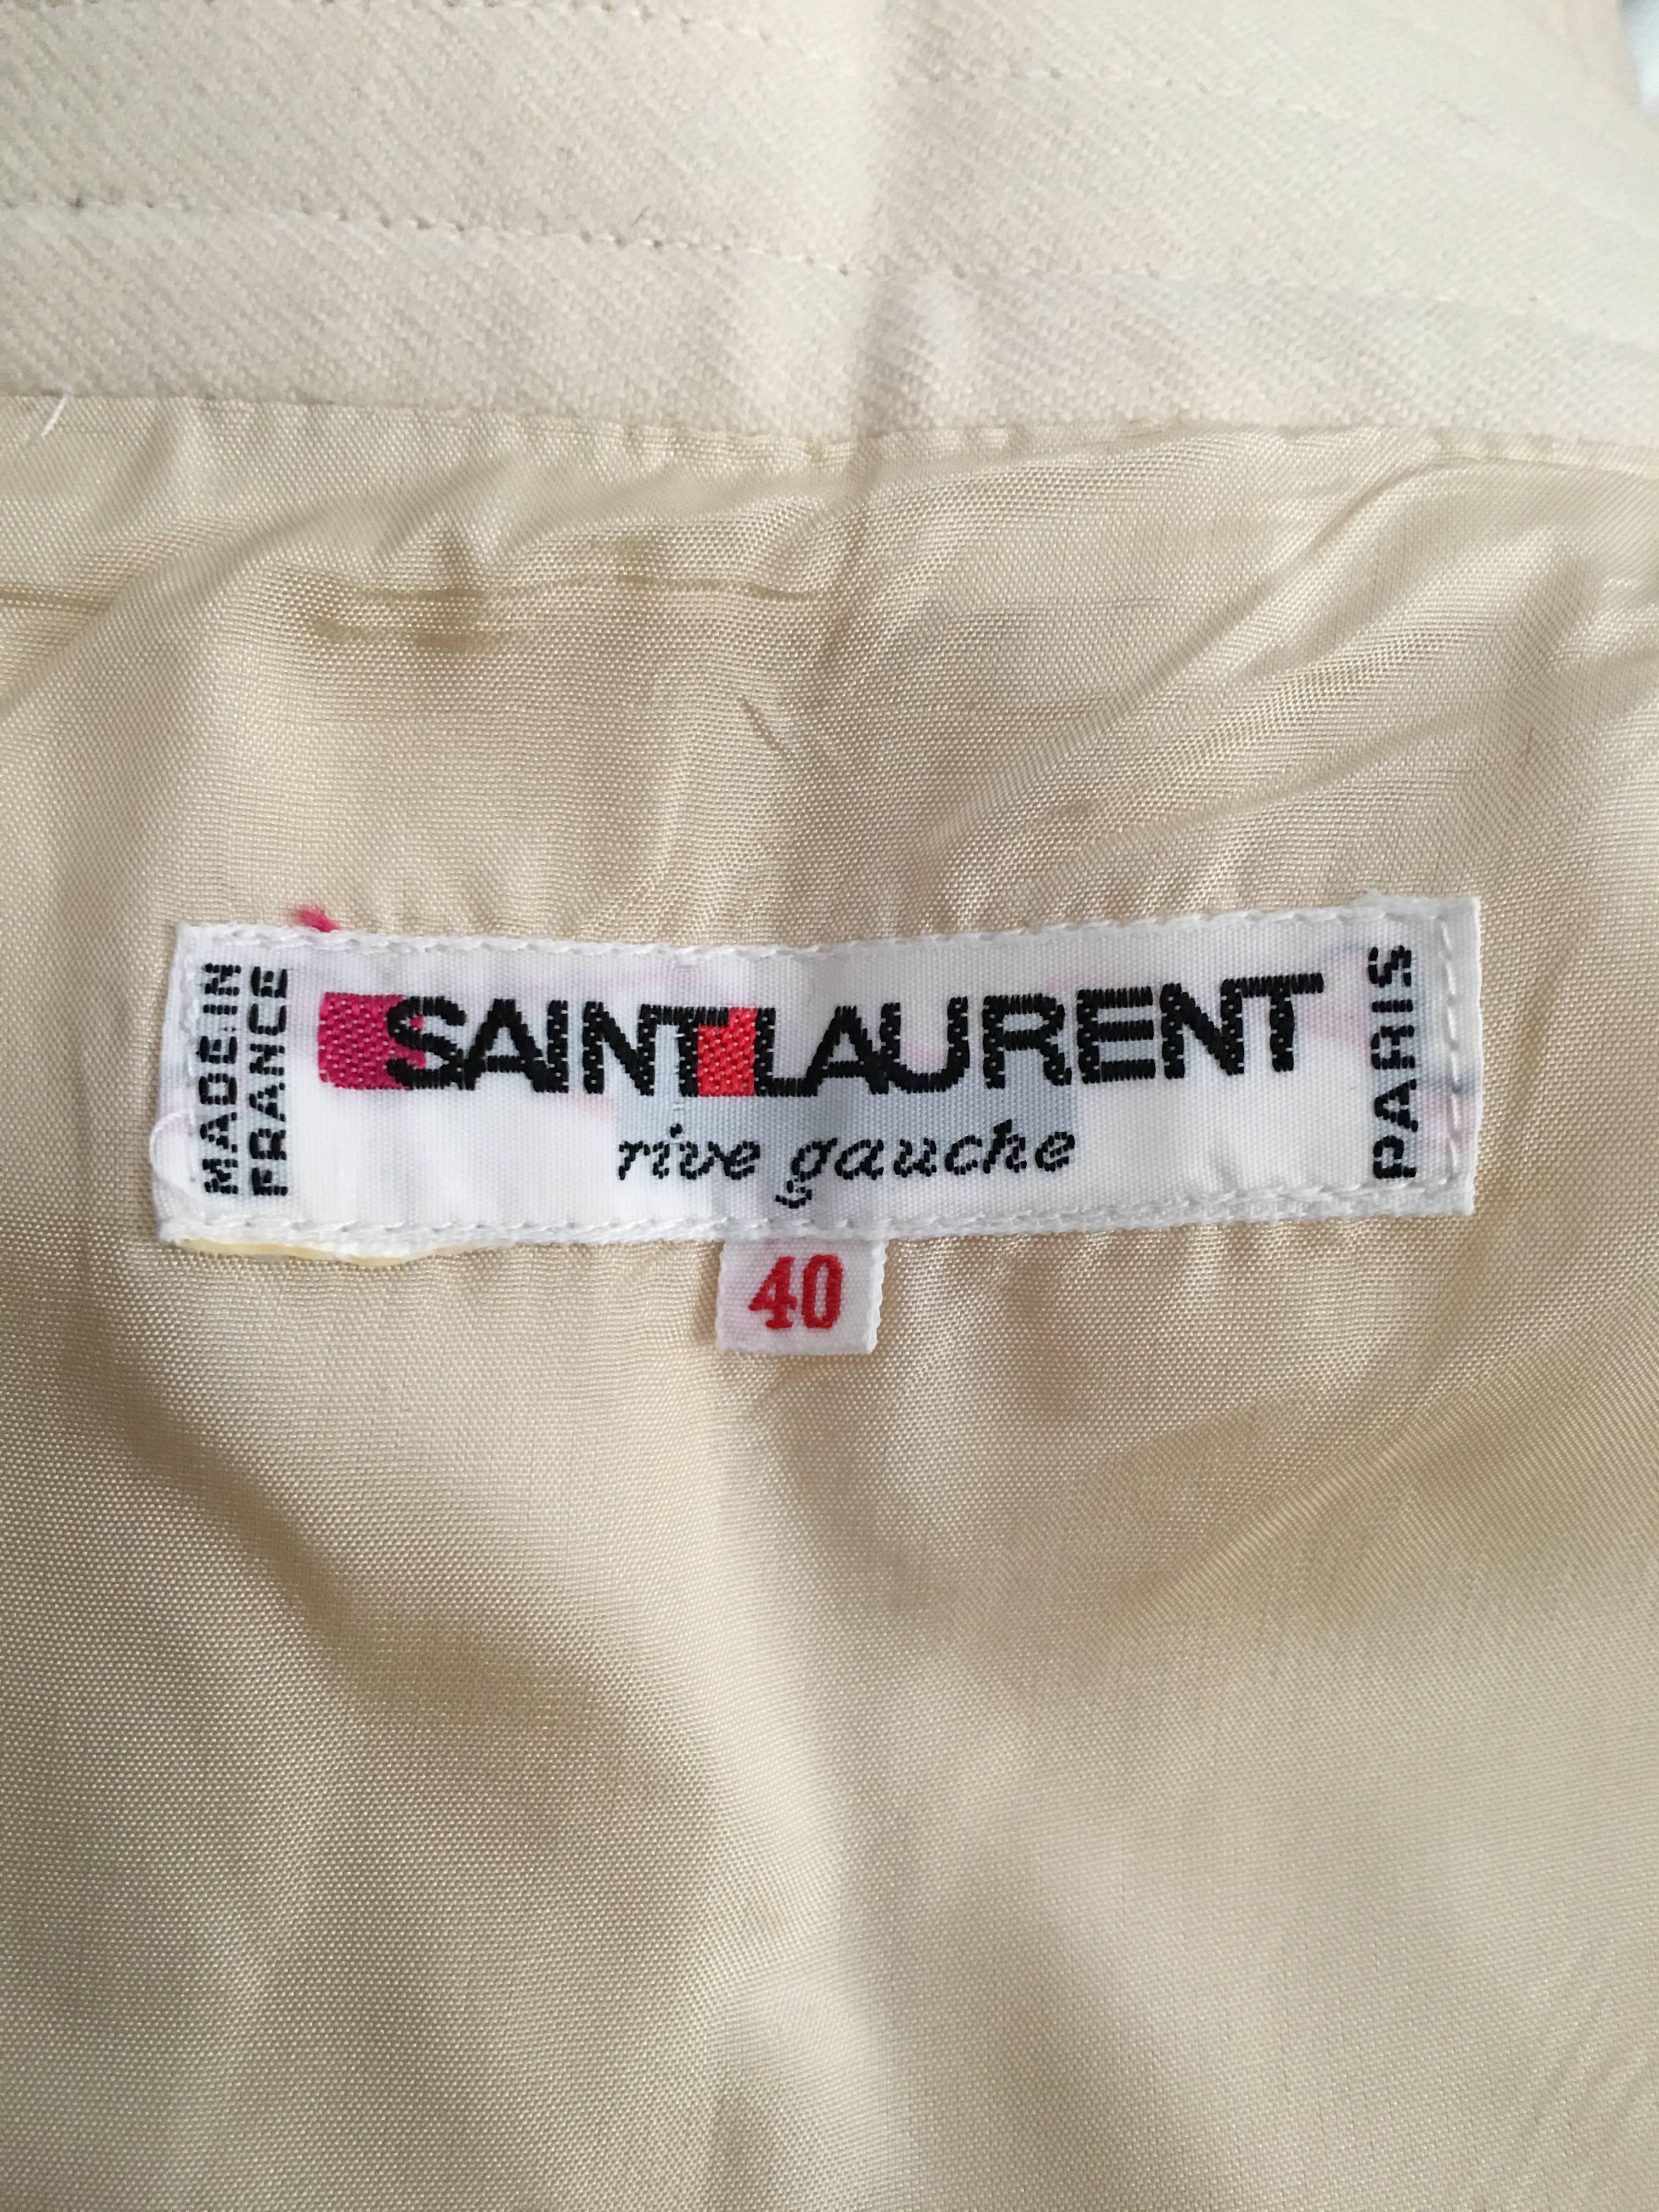 Saint Laurent Rive Gauche Wool Cream Pencil Skirt with Pockets, 1980s  For Sale 6